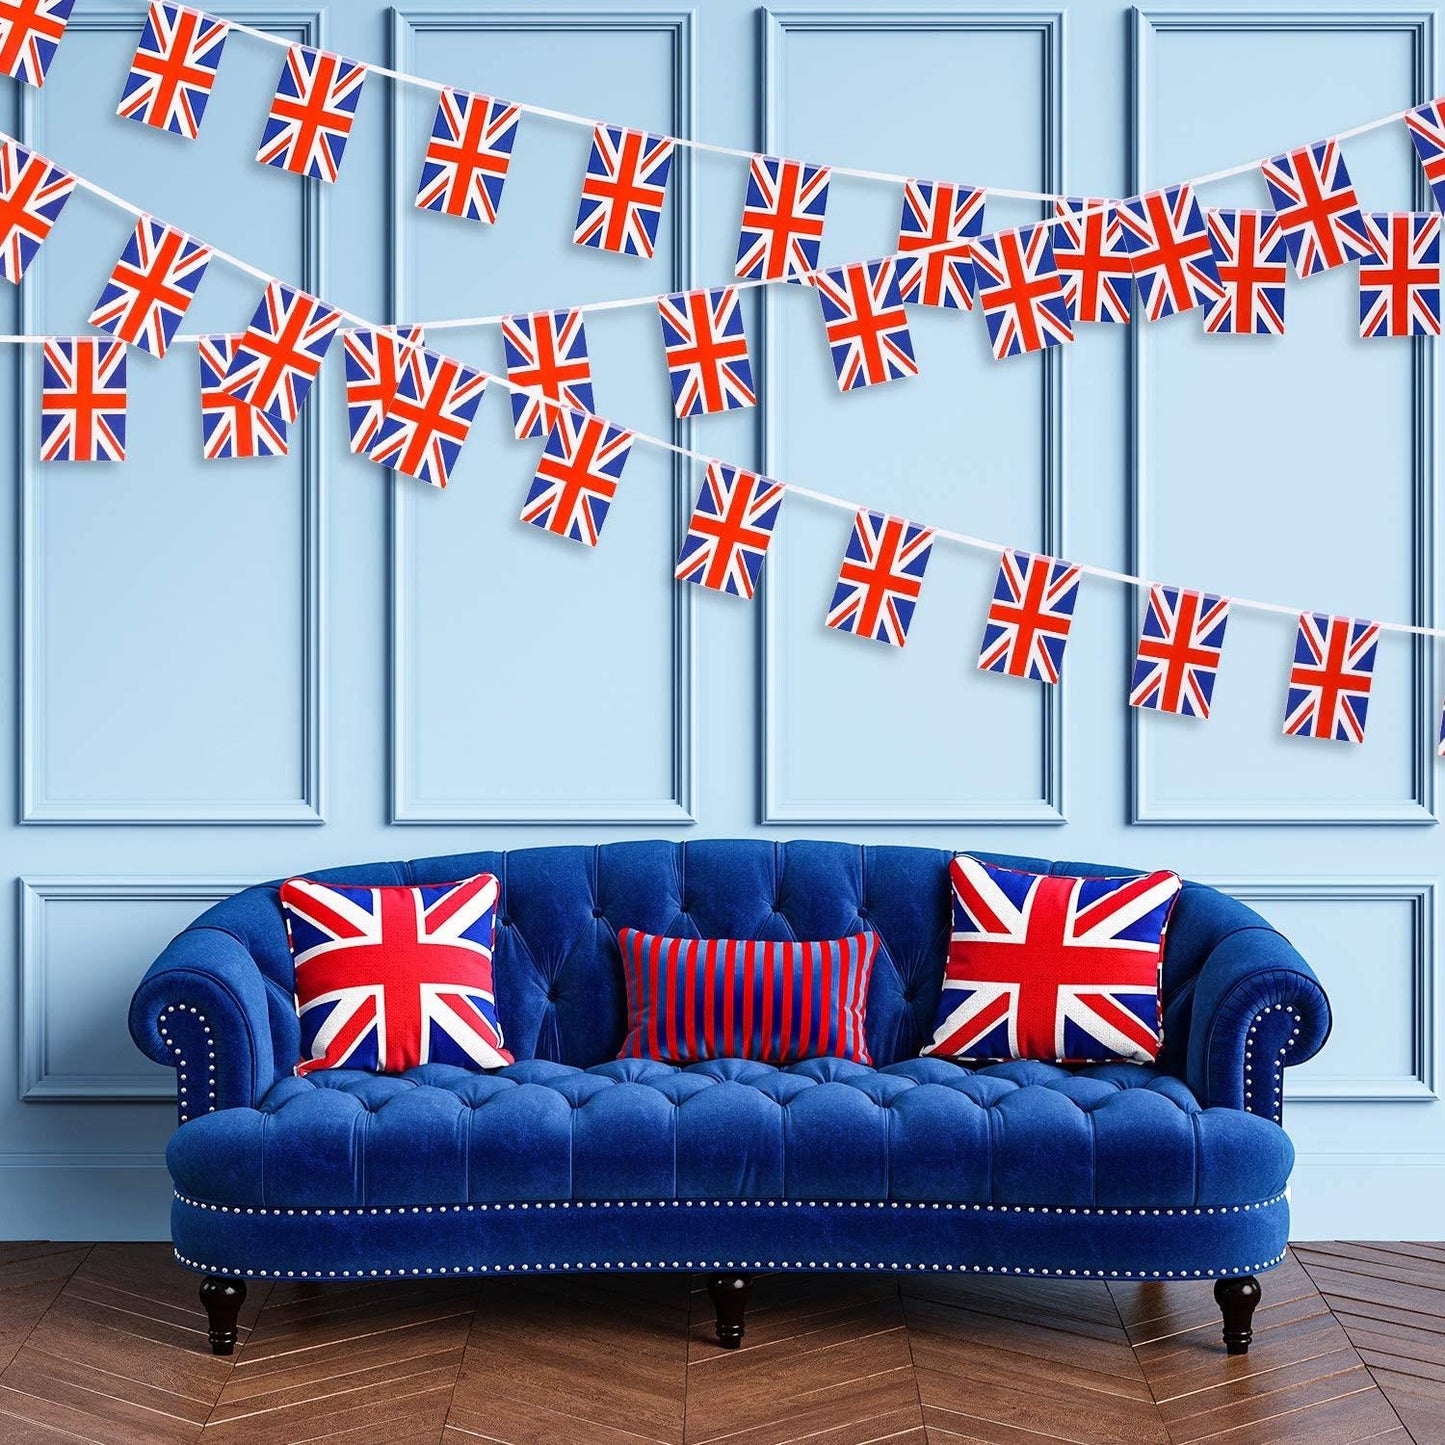 10m Fabric Union Jack Bunting 30 flags